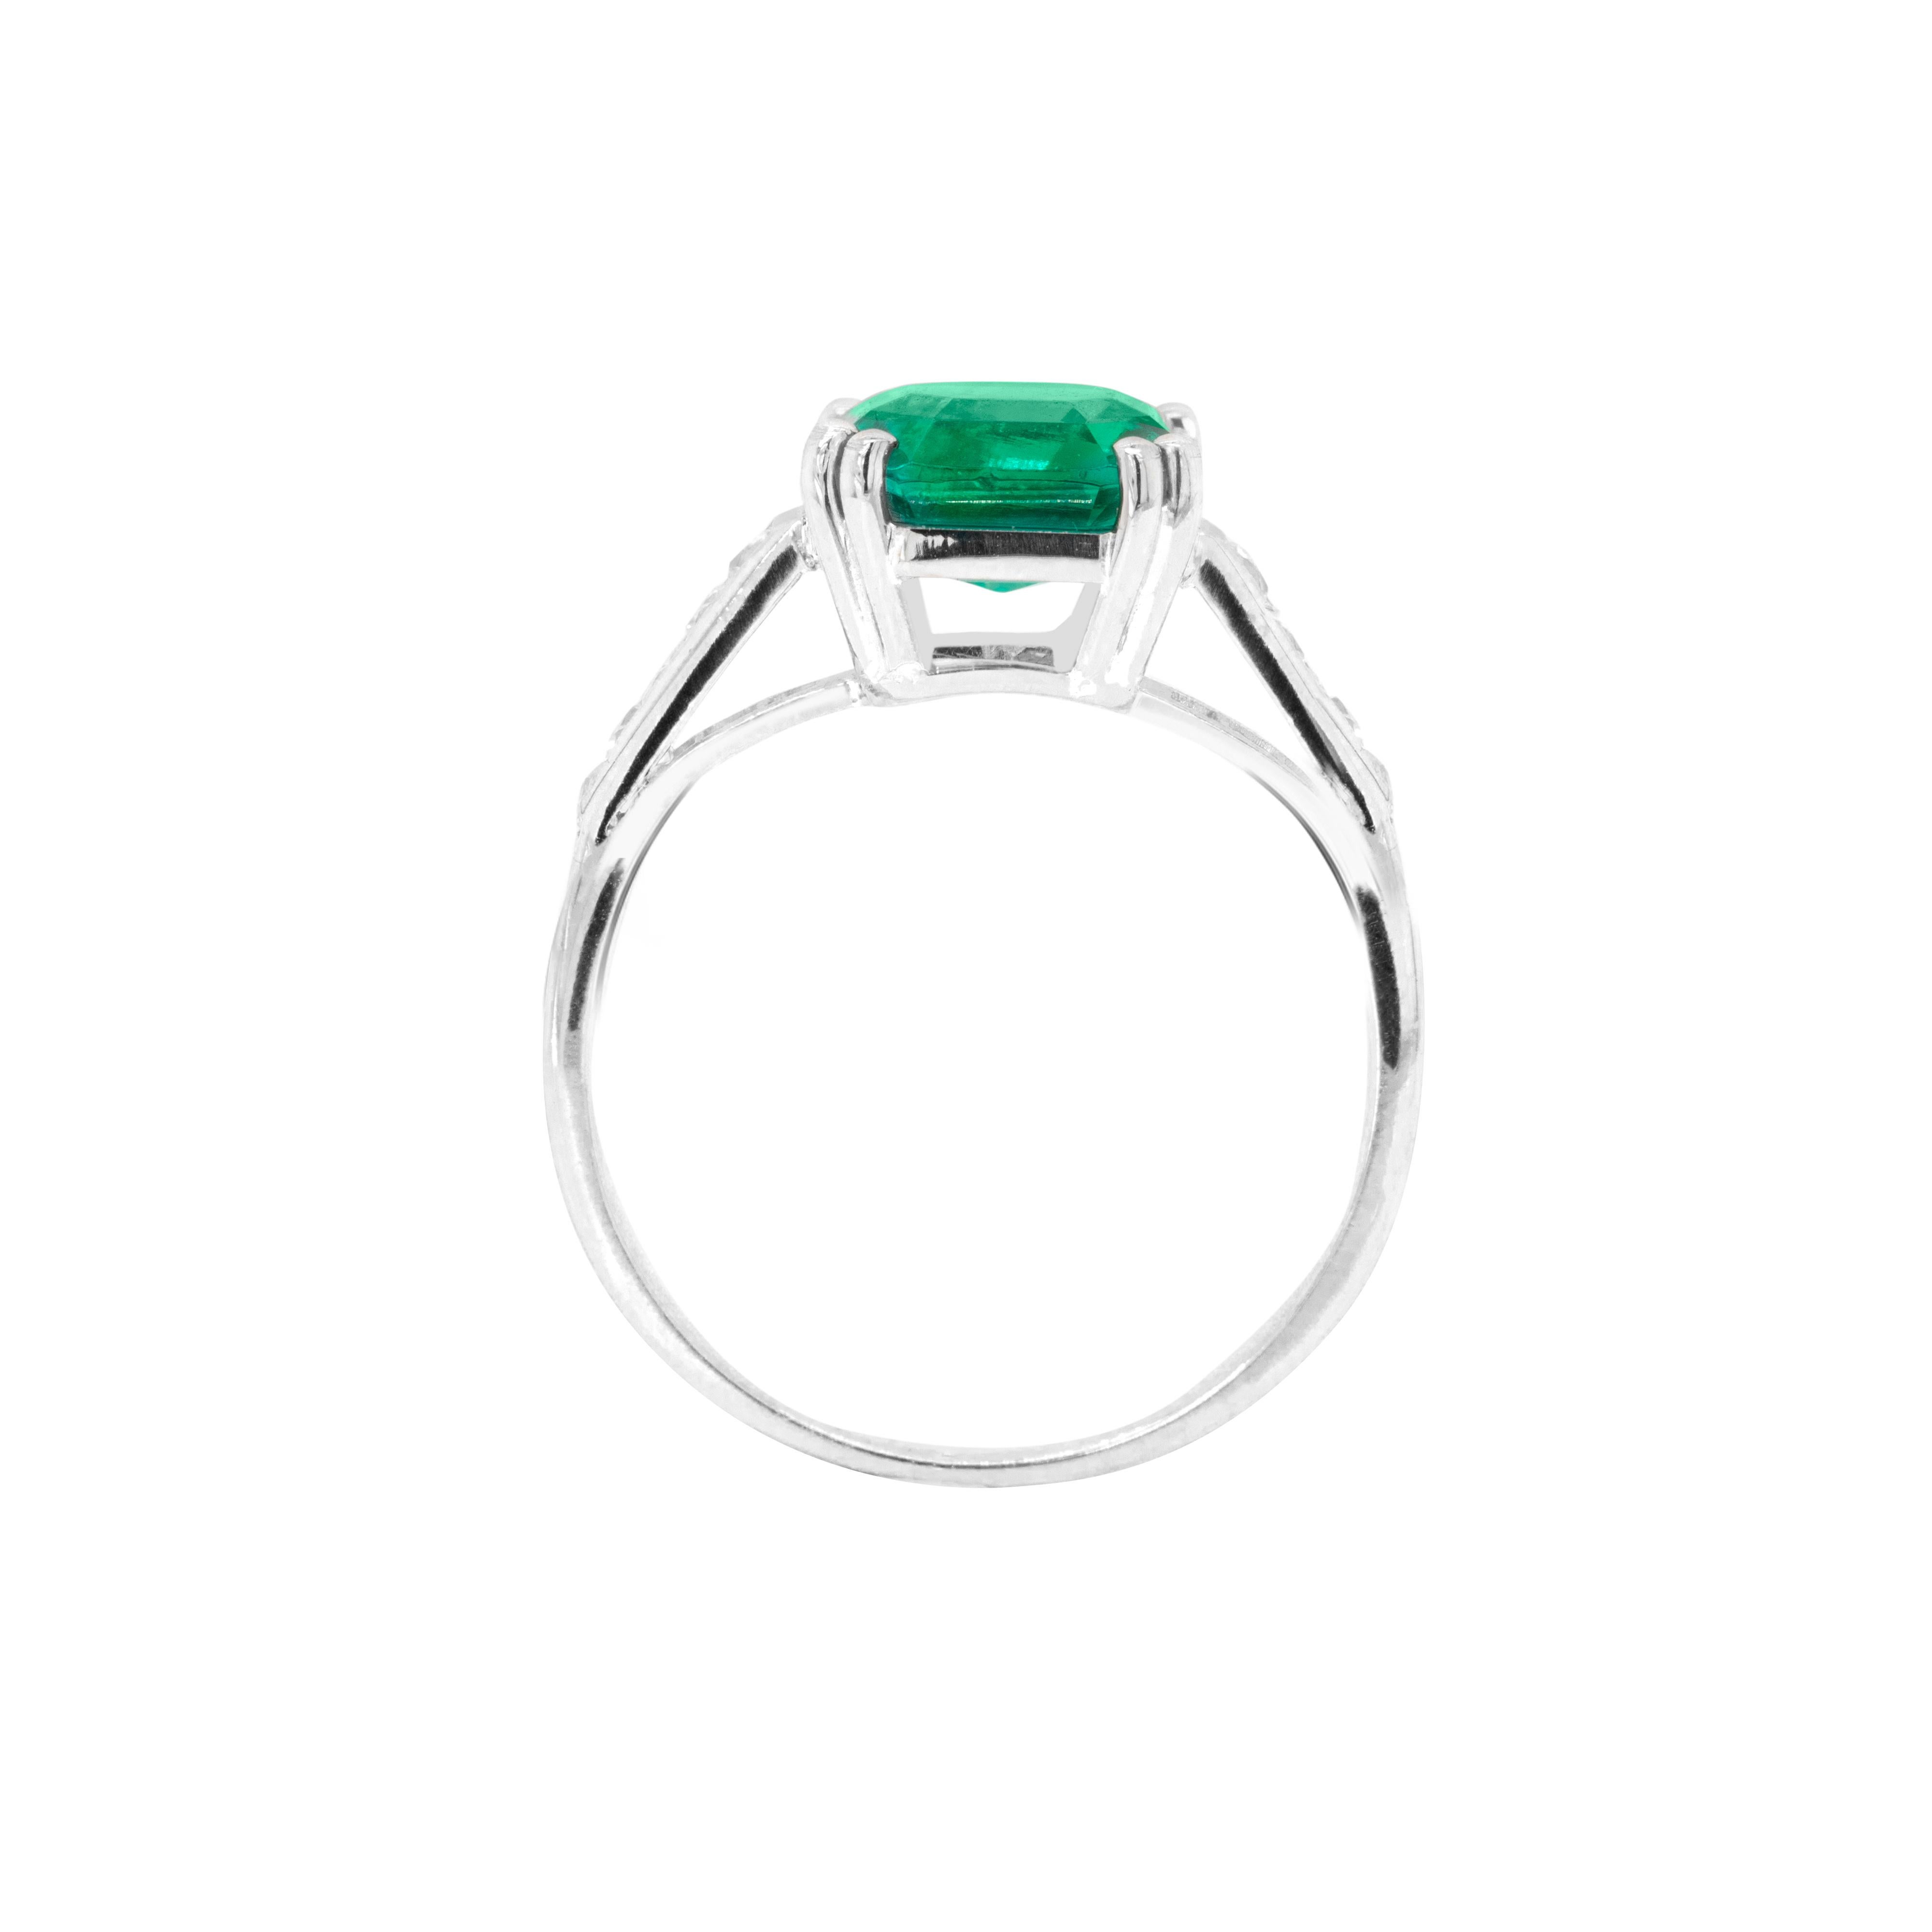 This gorgeous engagement ring features an exquisite 1.97 carat square emerald cut Colombian emerald mounted in a four double claw, open back setting. The vibrant gemstone is beautifully accompanied by five French cut diamonds, channel set on either